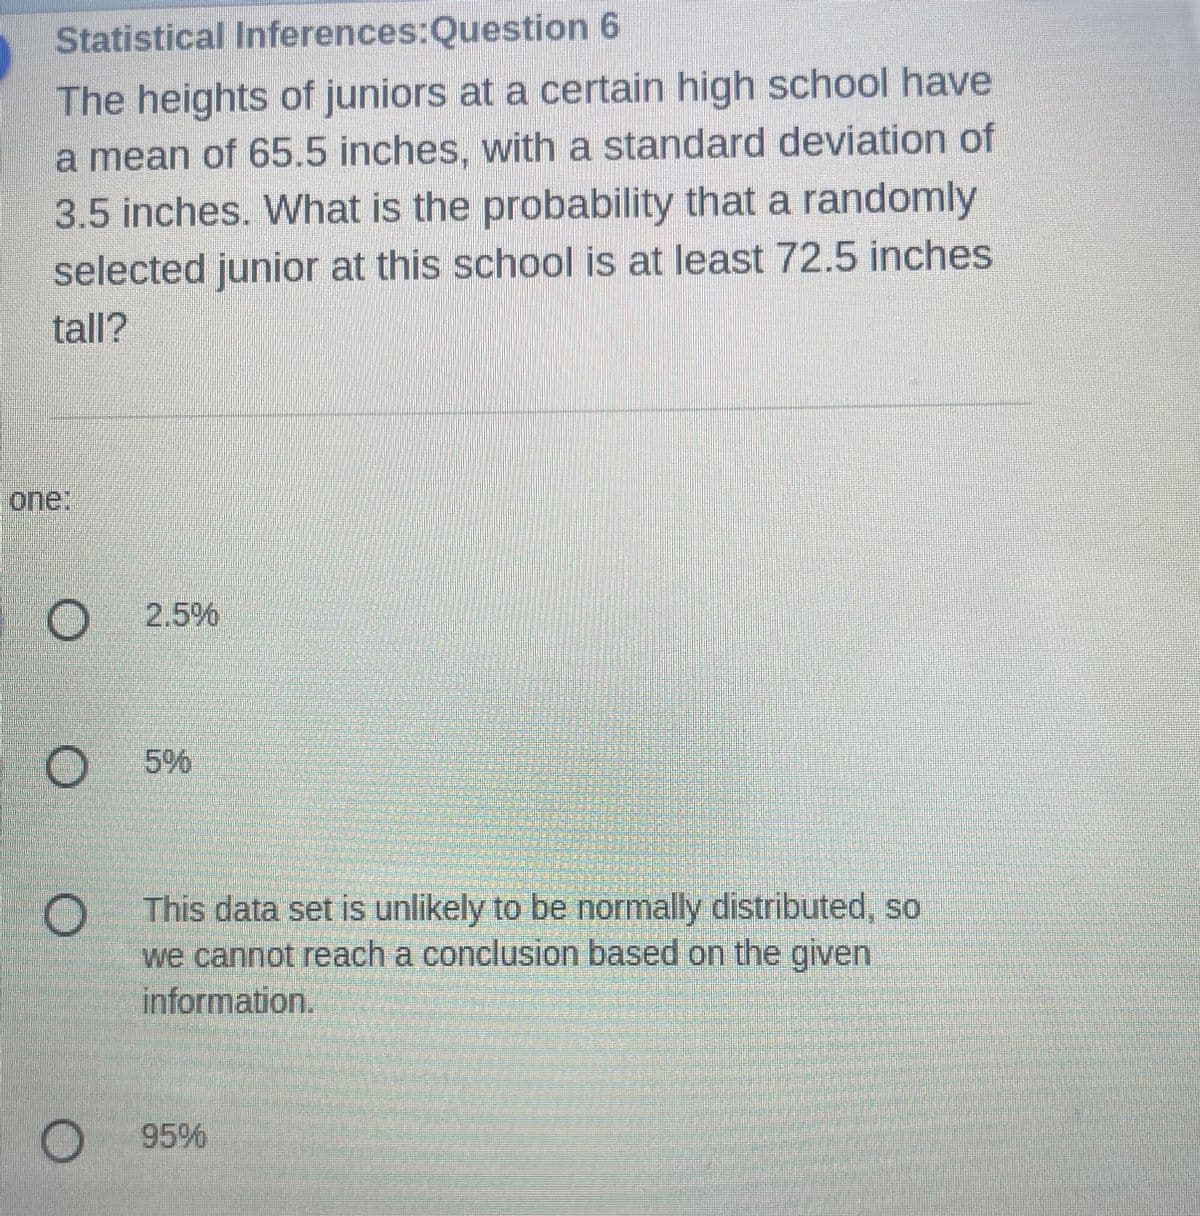 Statistical Inferences:Question 6
The heights of juniors at a certain high school have
a mean of 65.5 inches, with a standard deviation of
3.5 inches. What is the probability that a randomly
selected junior at this school is at least 72.5 inches
tall?
one:
This data set is unlikely to be normally distributed, so
we cannot reach a conclusion based on the given
information.
95%
O
O
O
O